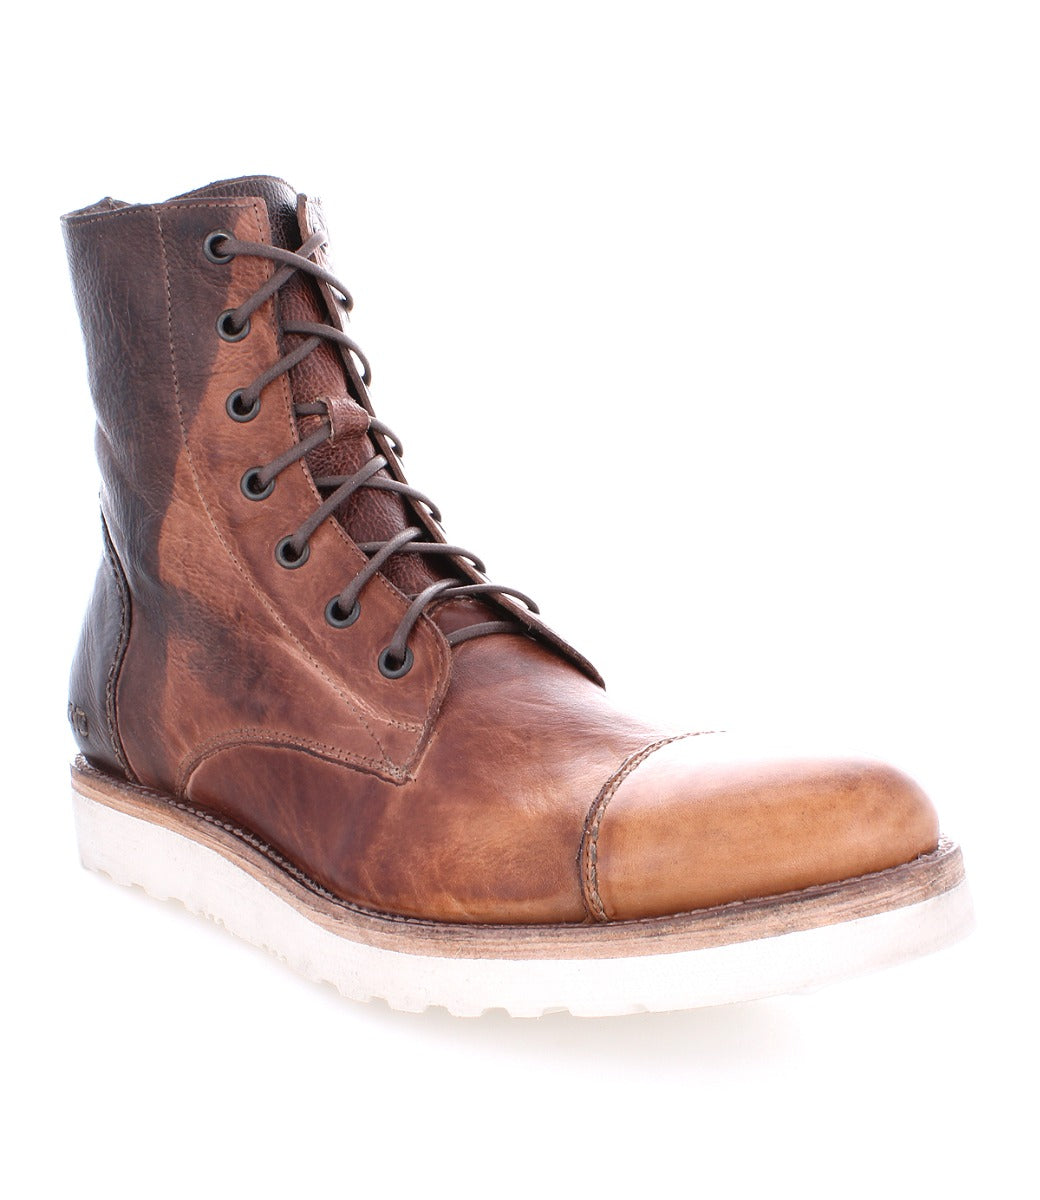 A single Protege Light boot by Bed Stu, brown leather with laces, featuring a cap toe and cushioned leather insoles, isolated on a white background.